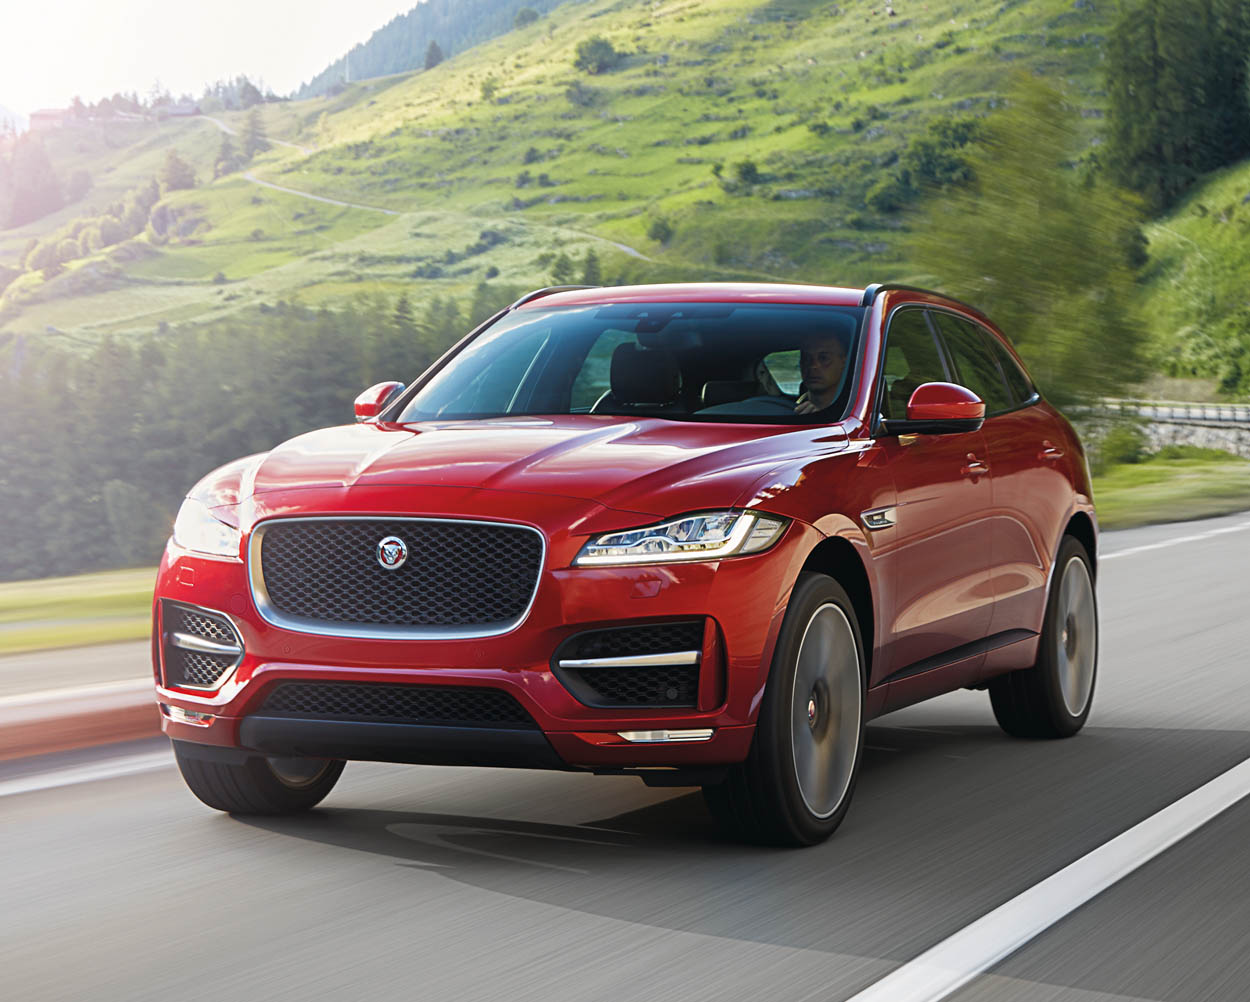 Jag_FPACE_RSport_Location_Image_140915_04